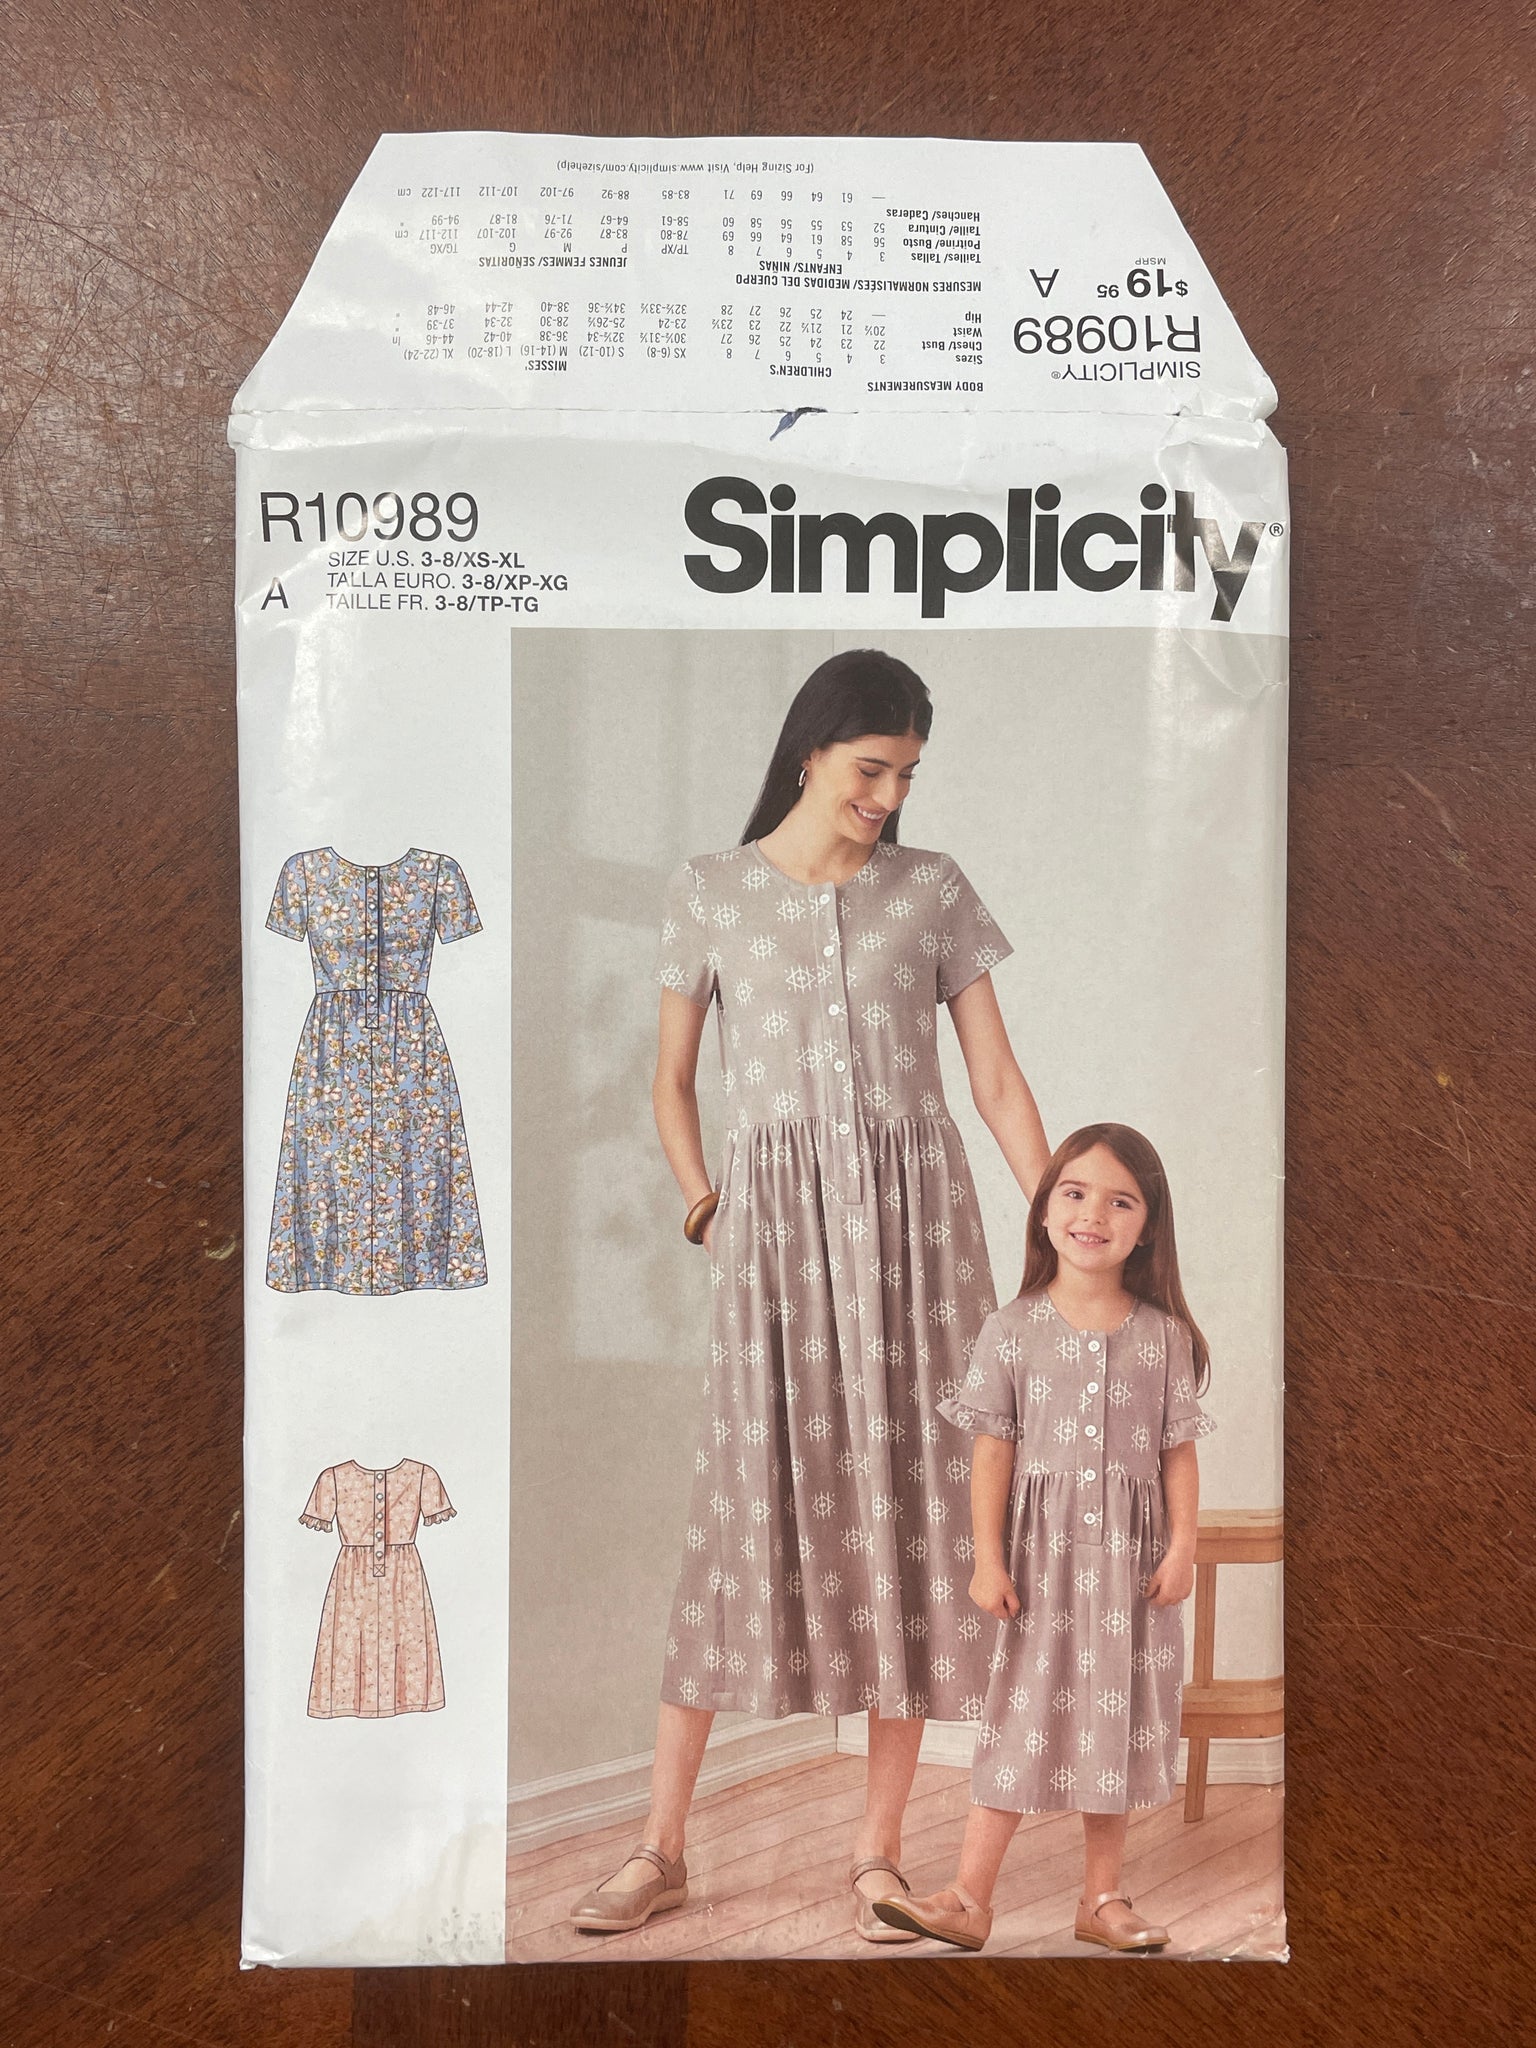 2021 Simplicity 10989 Sewing Pattern - Girl's and Women's Dress FACTORY FOLDED